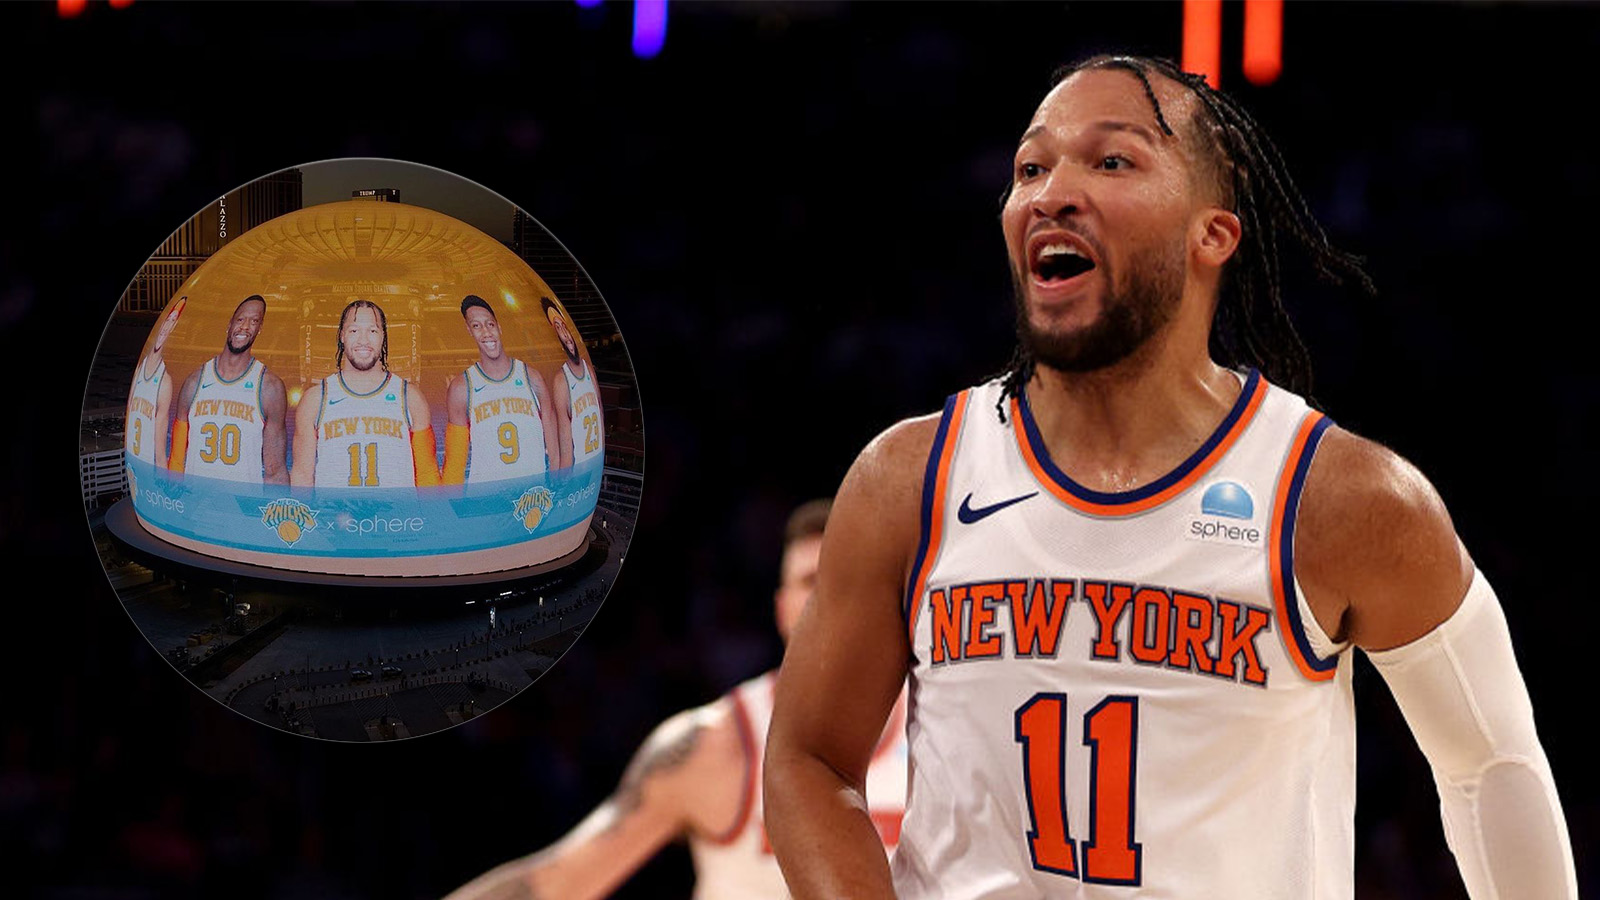 Knicks Sign Jersey Patch Deal With Vegas Sphere - Yahoo Sports